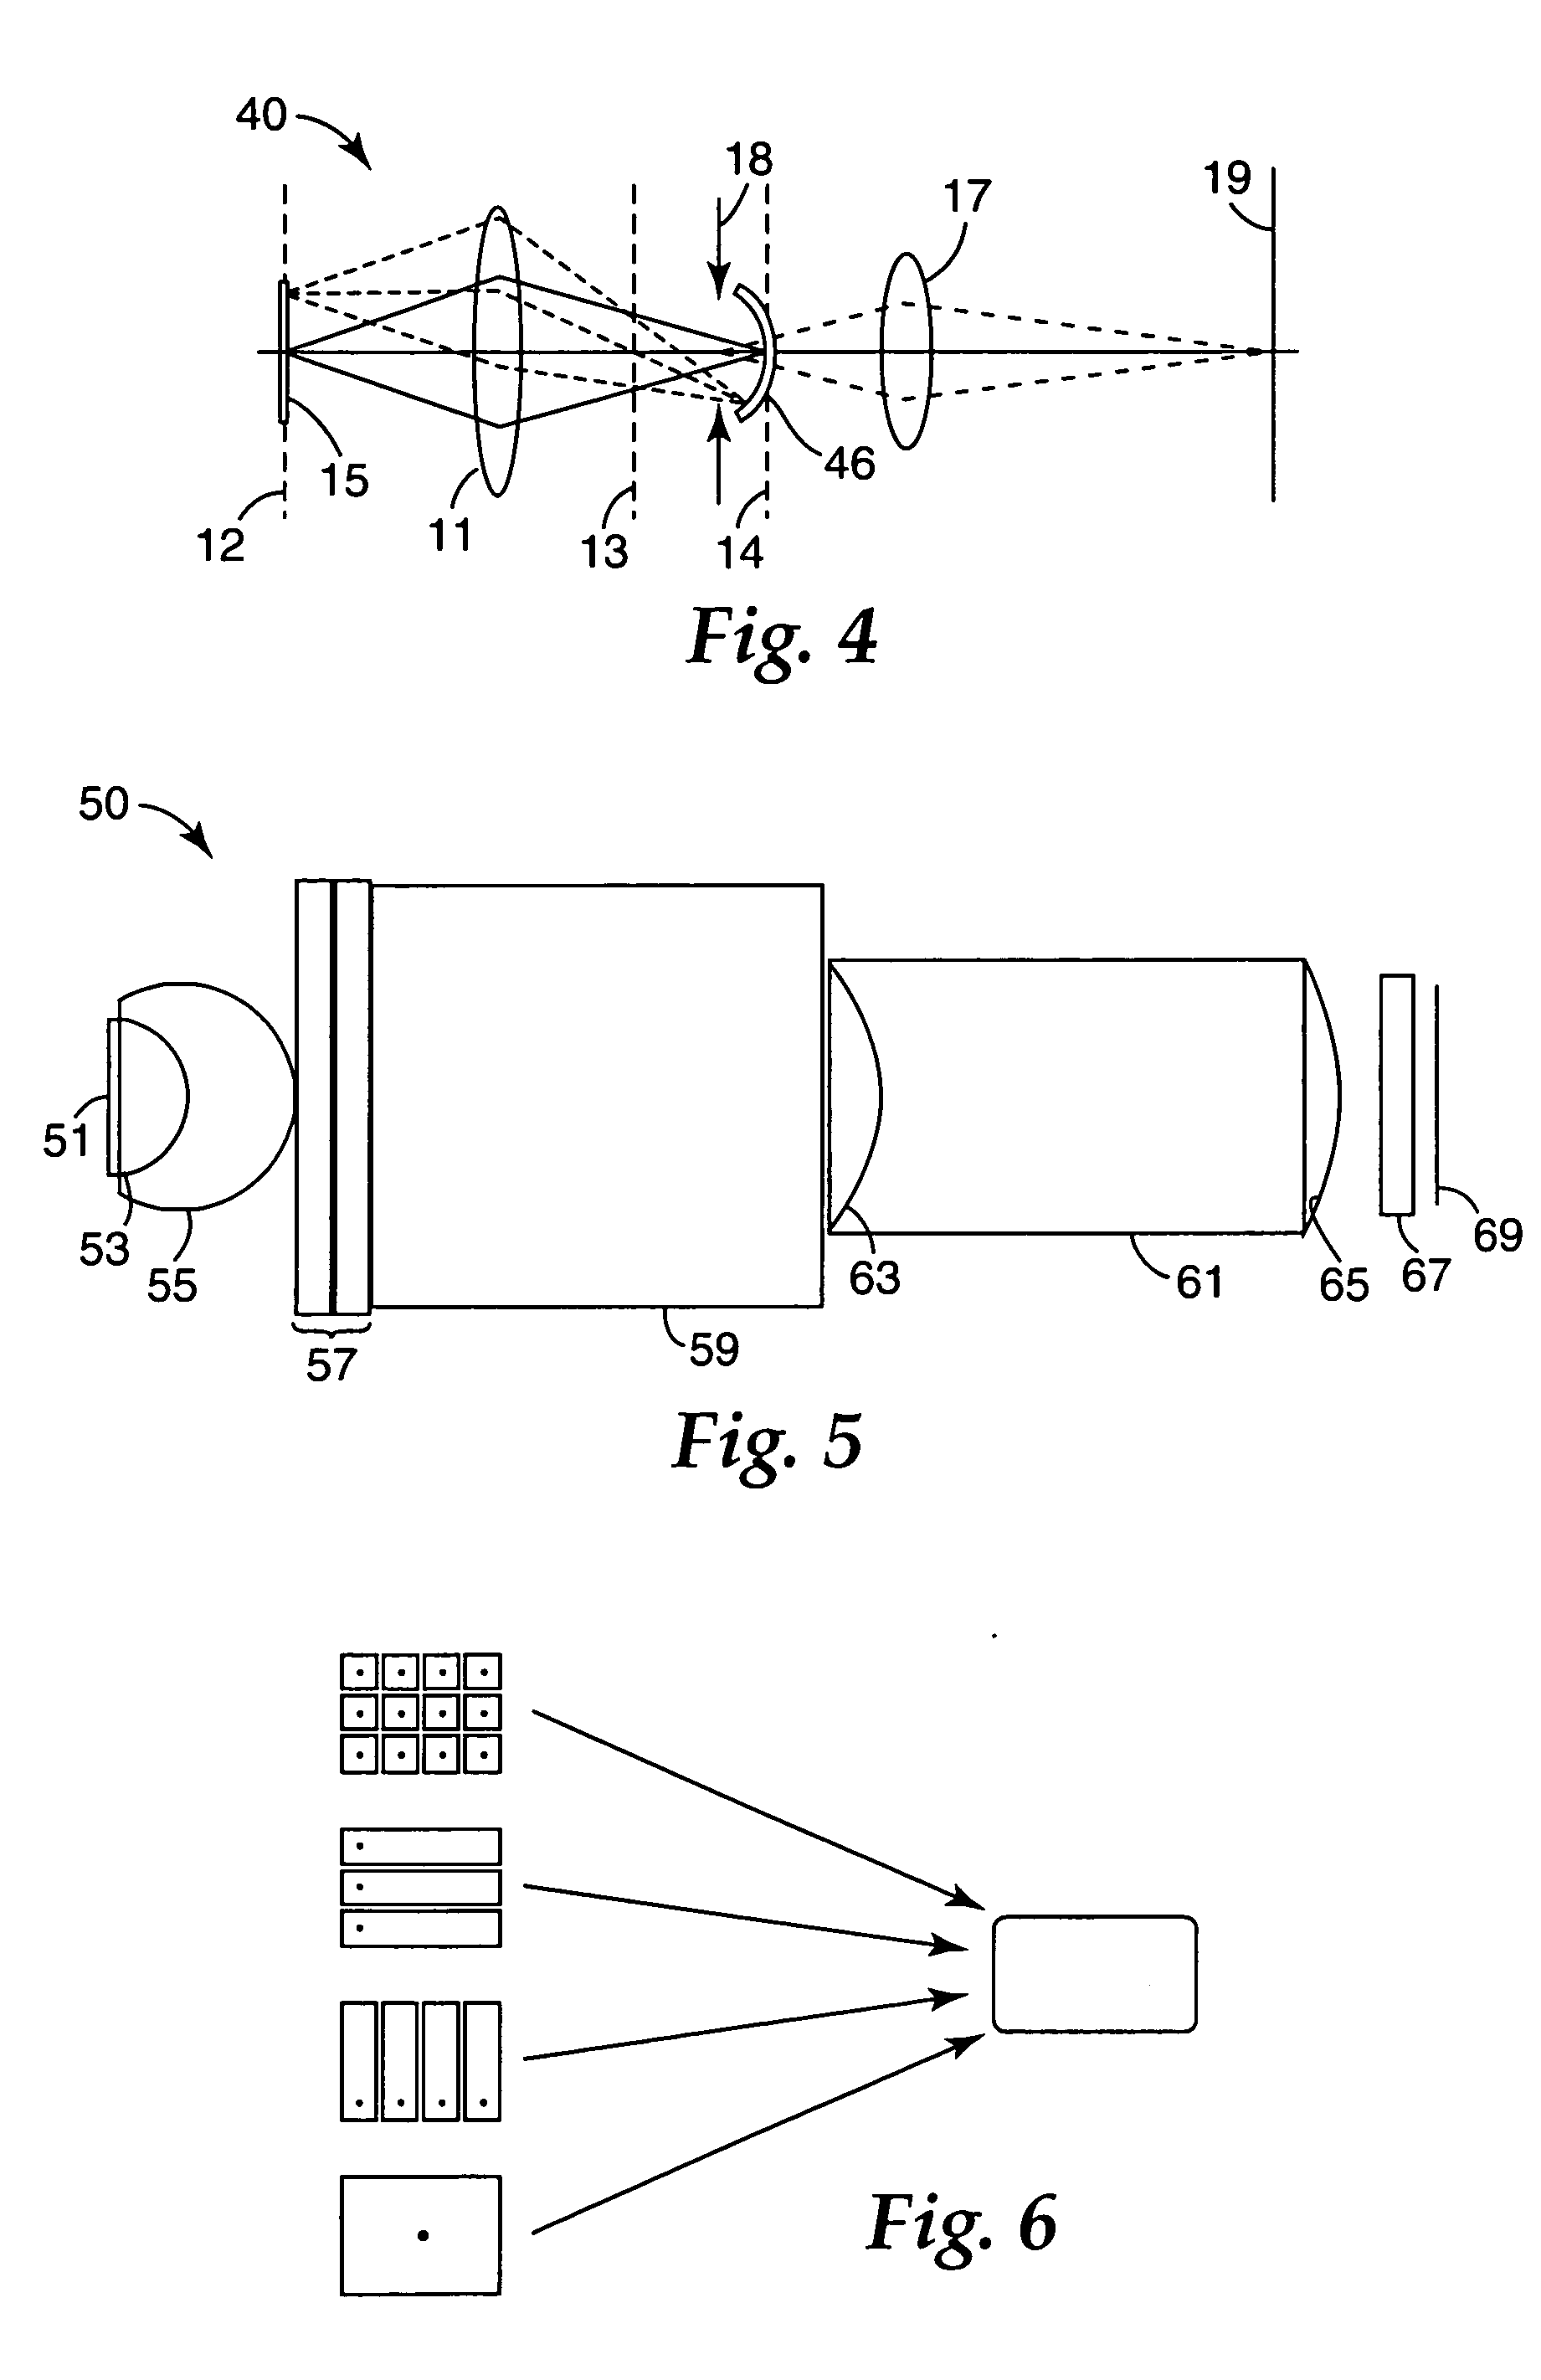 Projection system with beam homogenizer